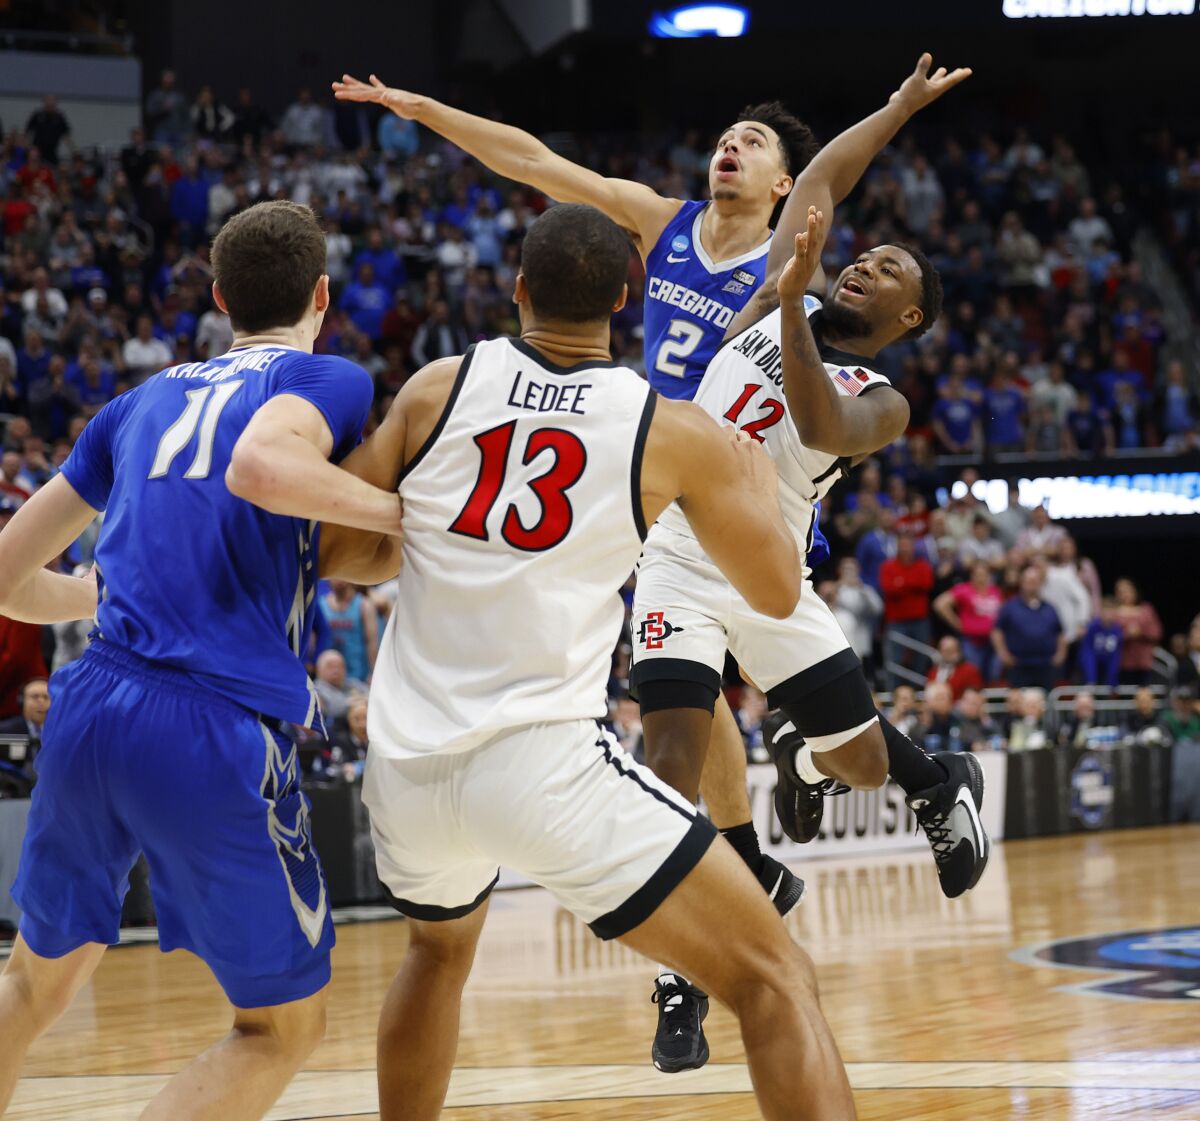 SDSU's Darrion Trammell is fouled by Creighton's Ryan Nembhard to set up game-winning free throw in a 57-56 victory.